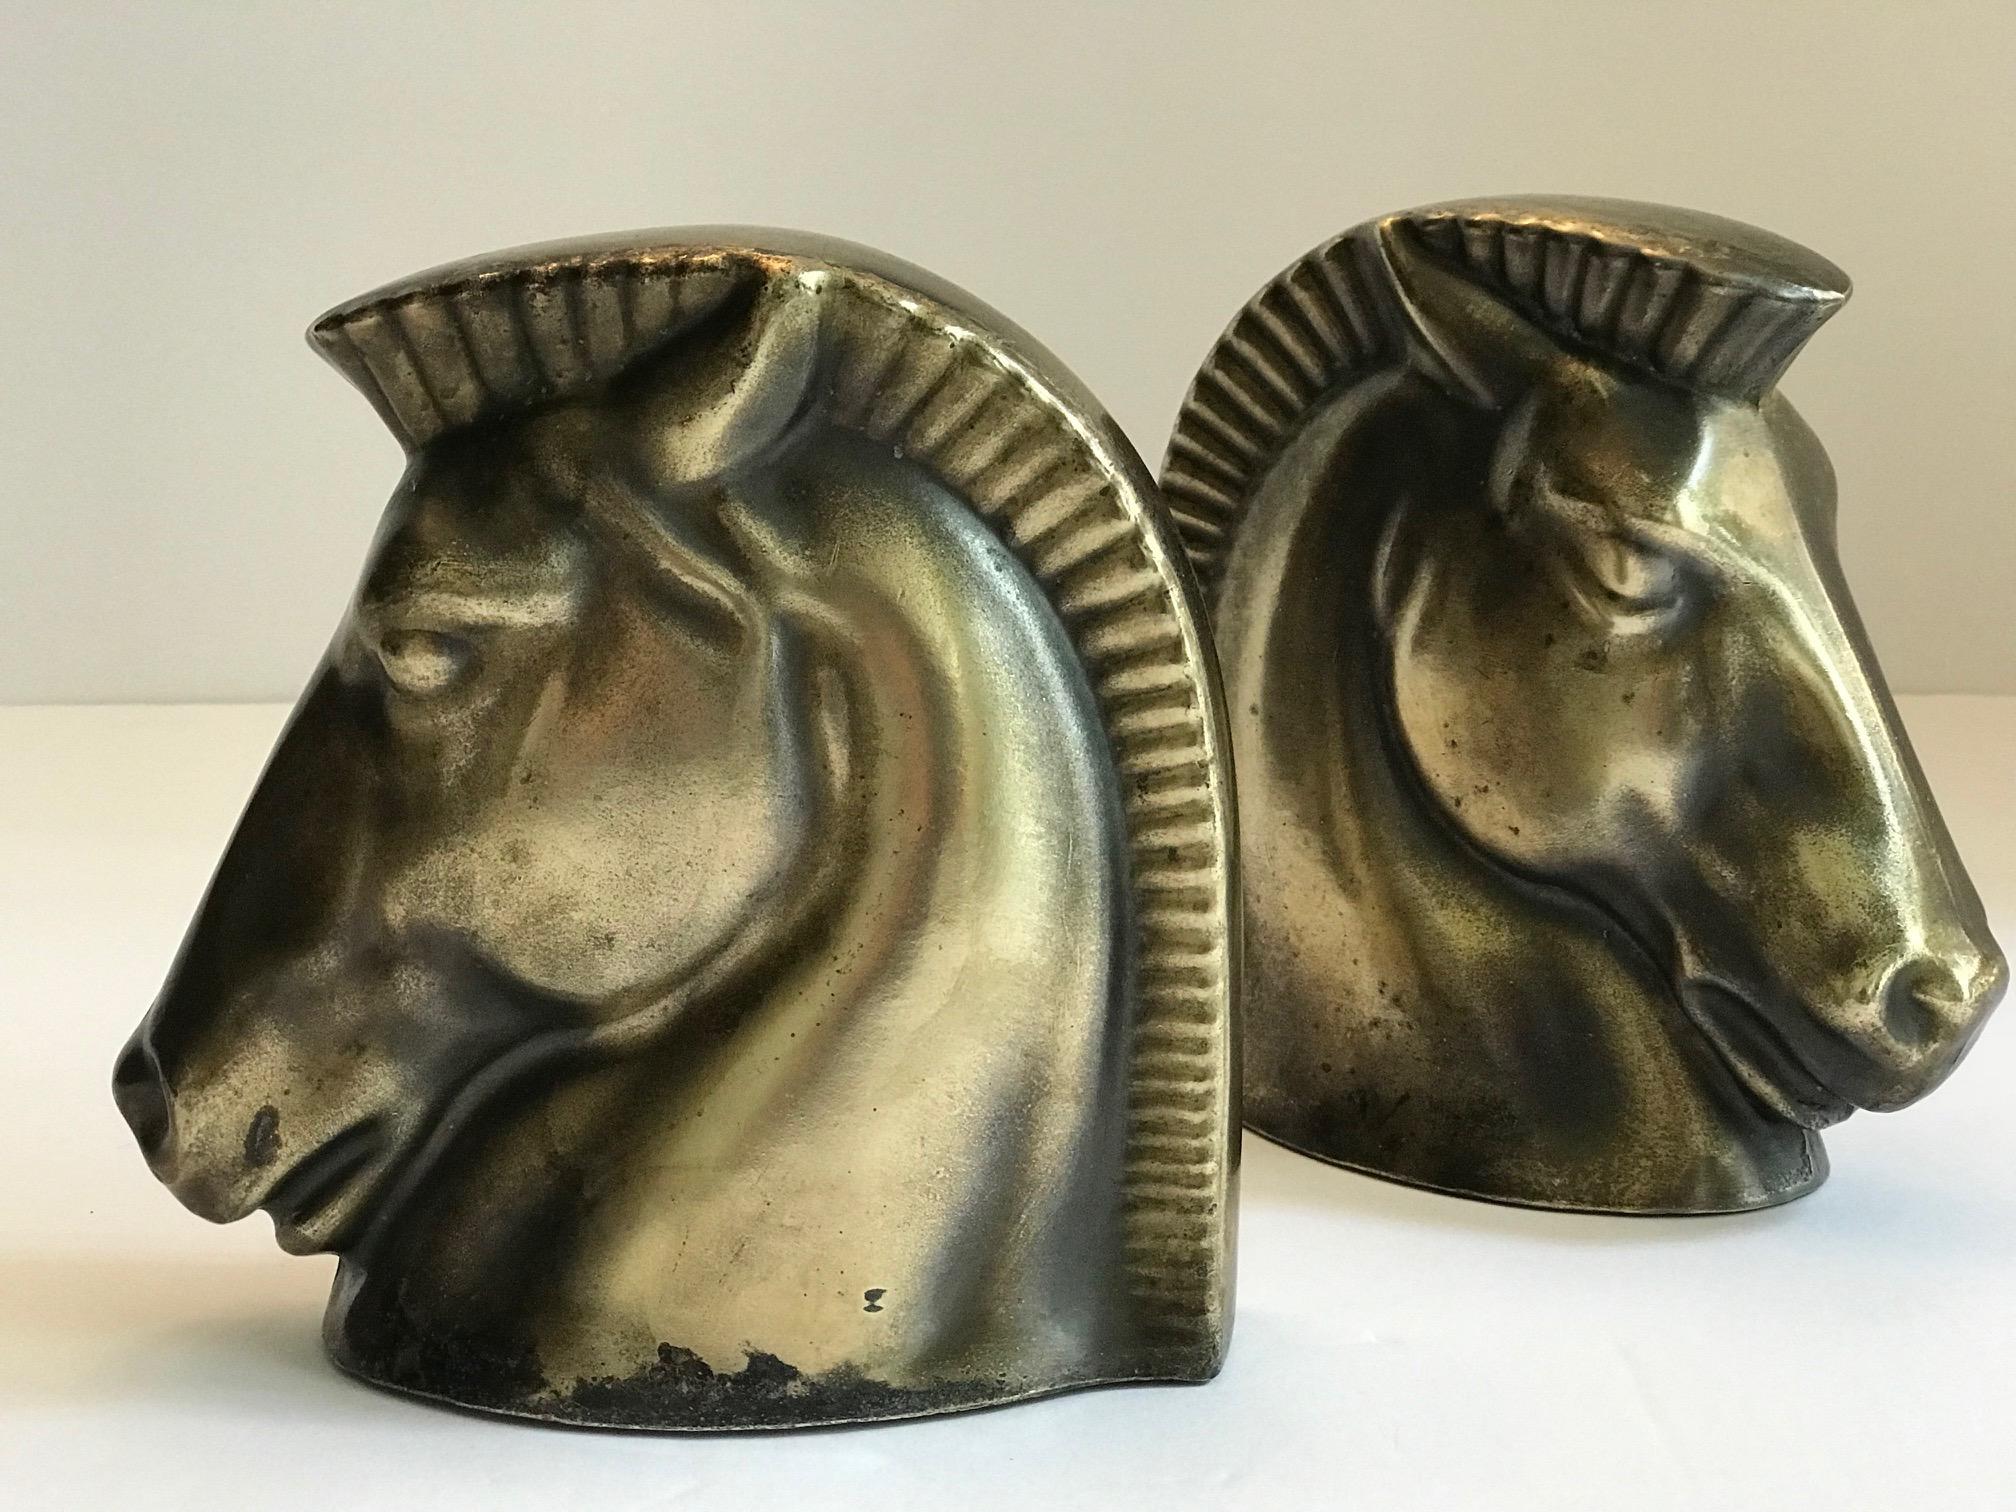 Pair of Art Deco Brass Plated Trojan Horse Bookends by Frankart 6